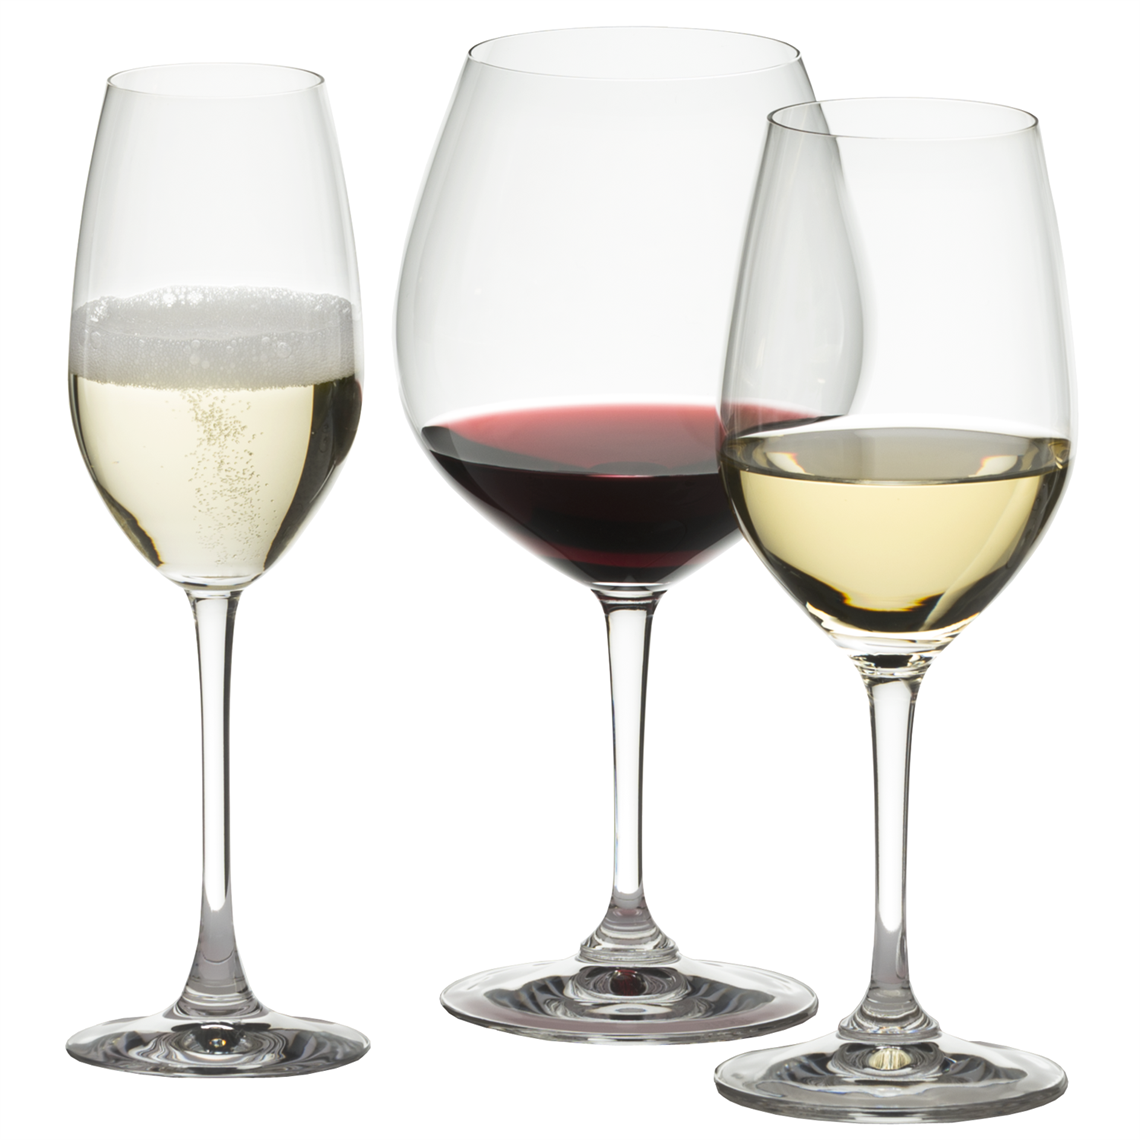 View more glassware from our Restaurant & Trade Glasses range